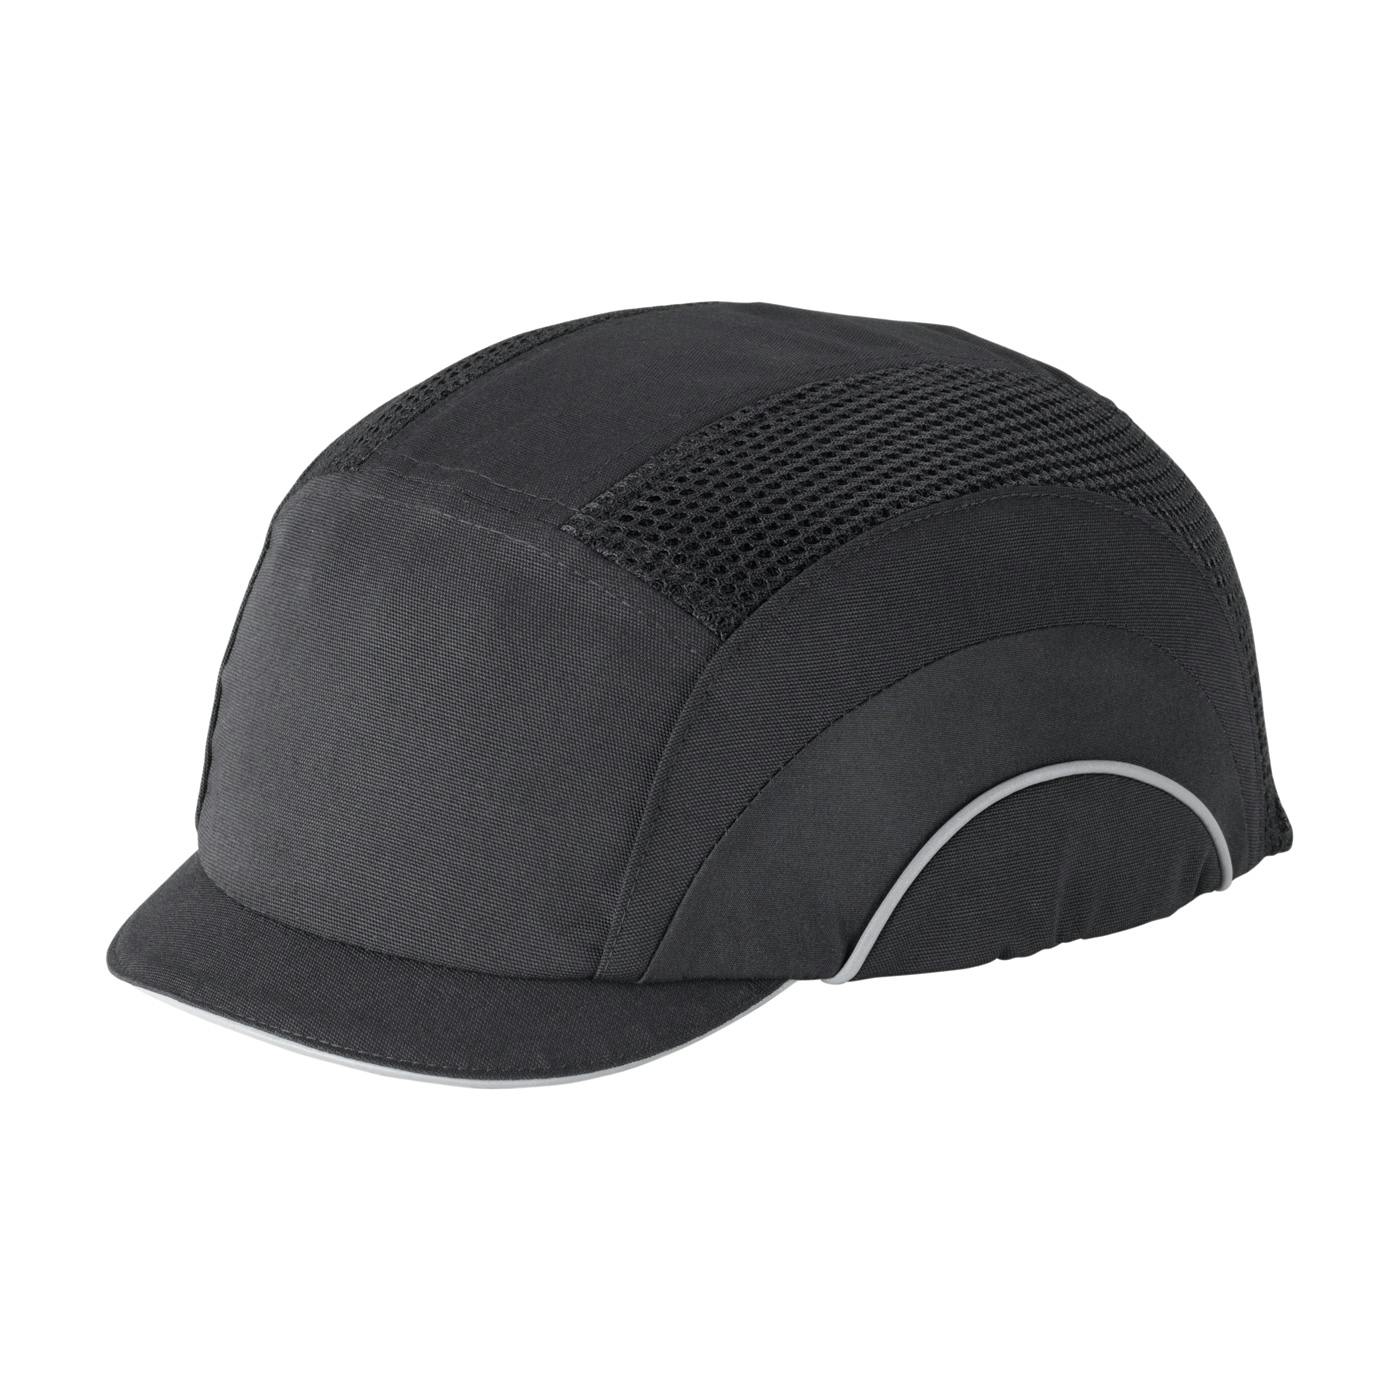 HardCap A1+™ Baseball Style Bump Cap with HDPE Protective Liner and Adjustable Back - Micro Brim (282-ABM130)